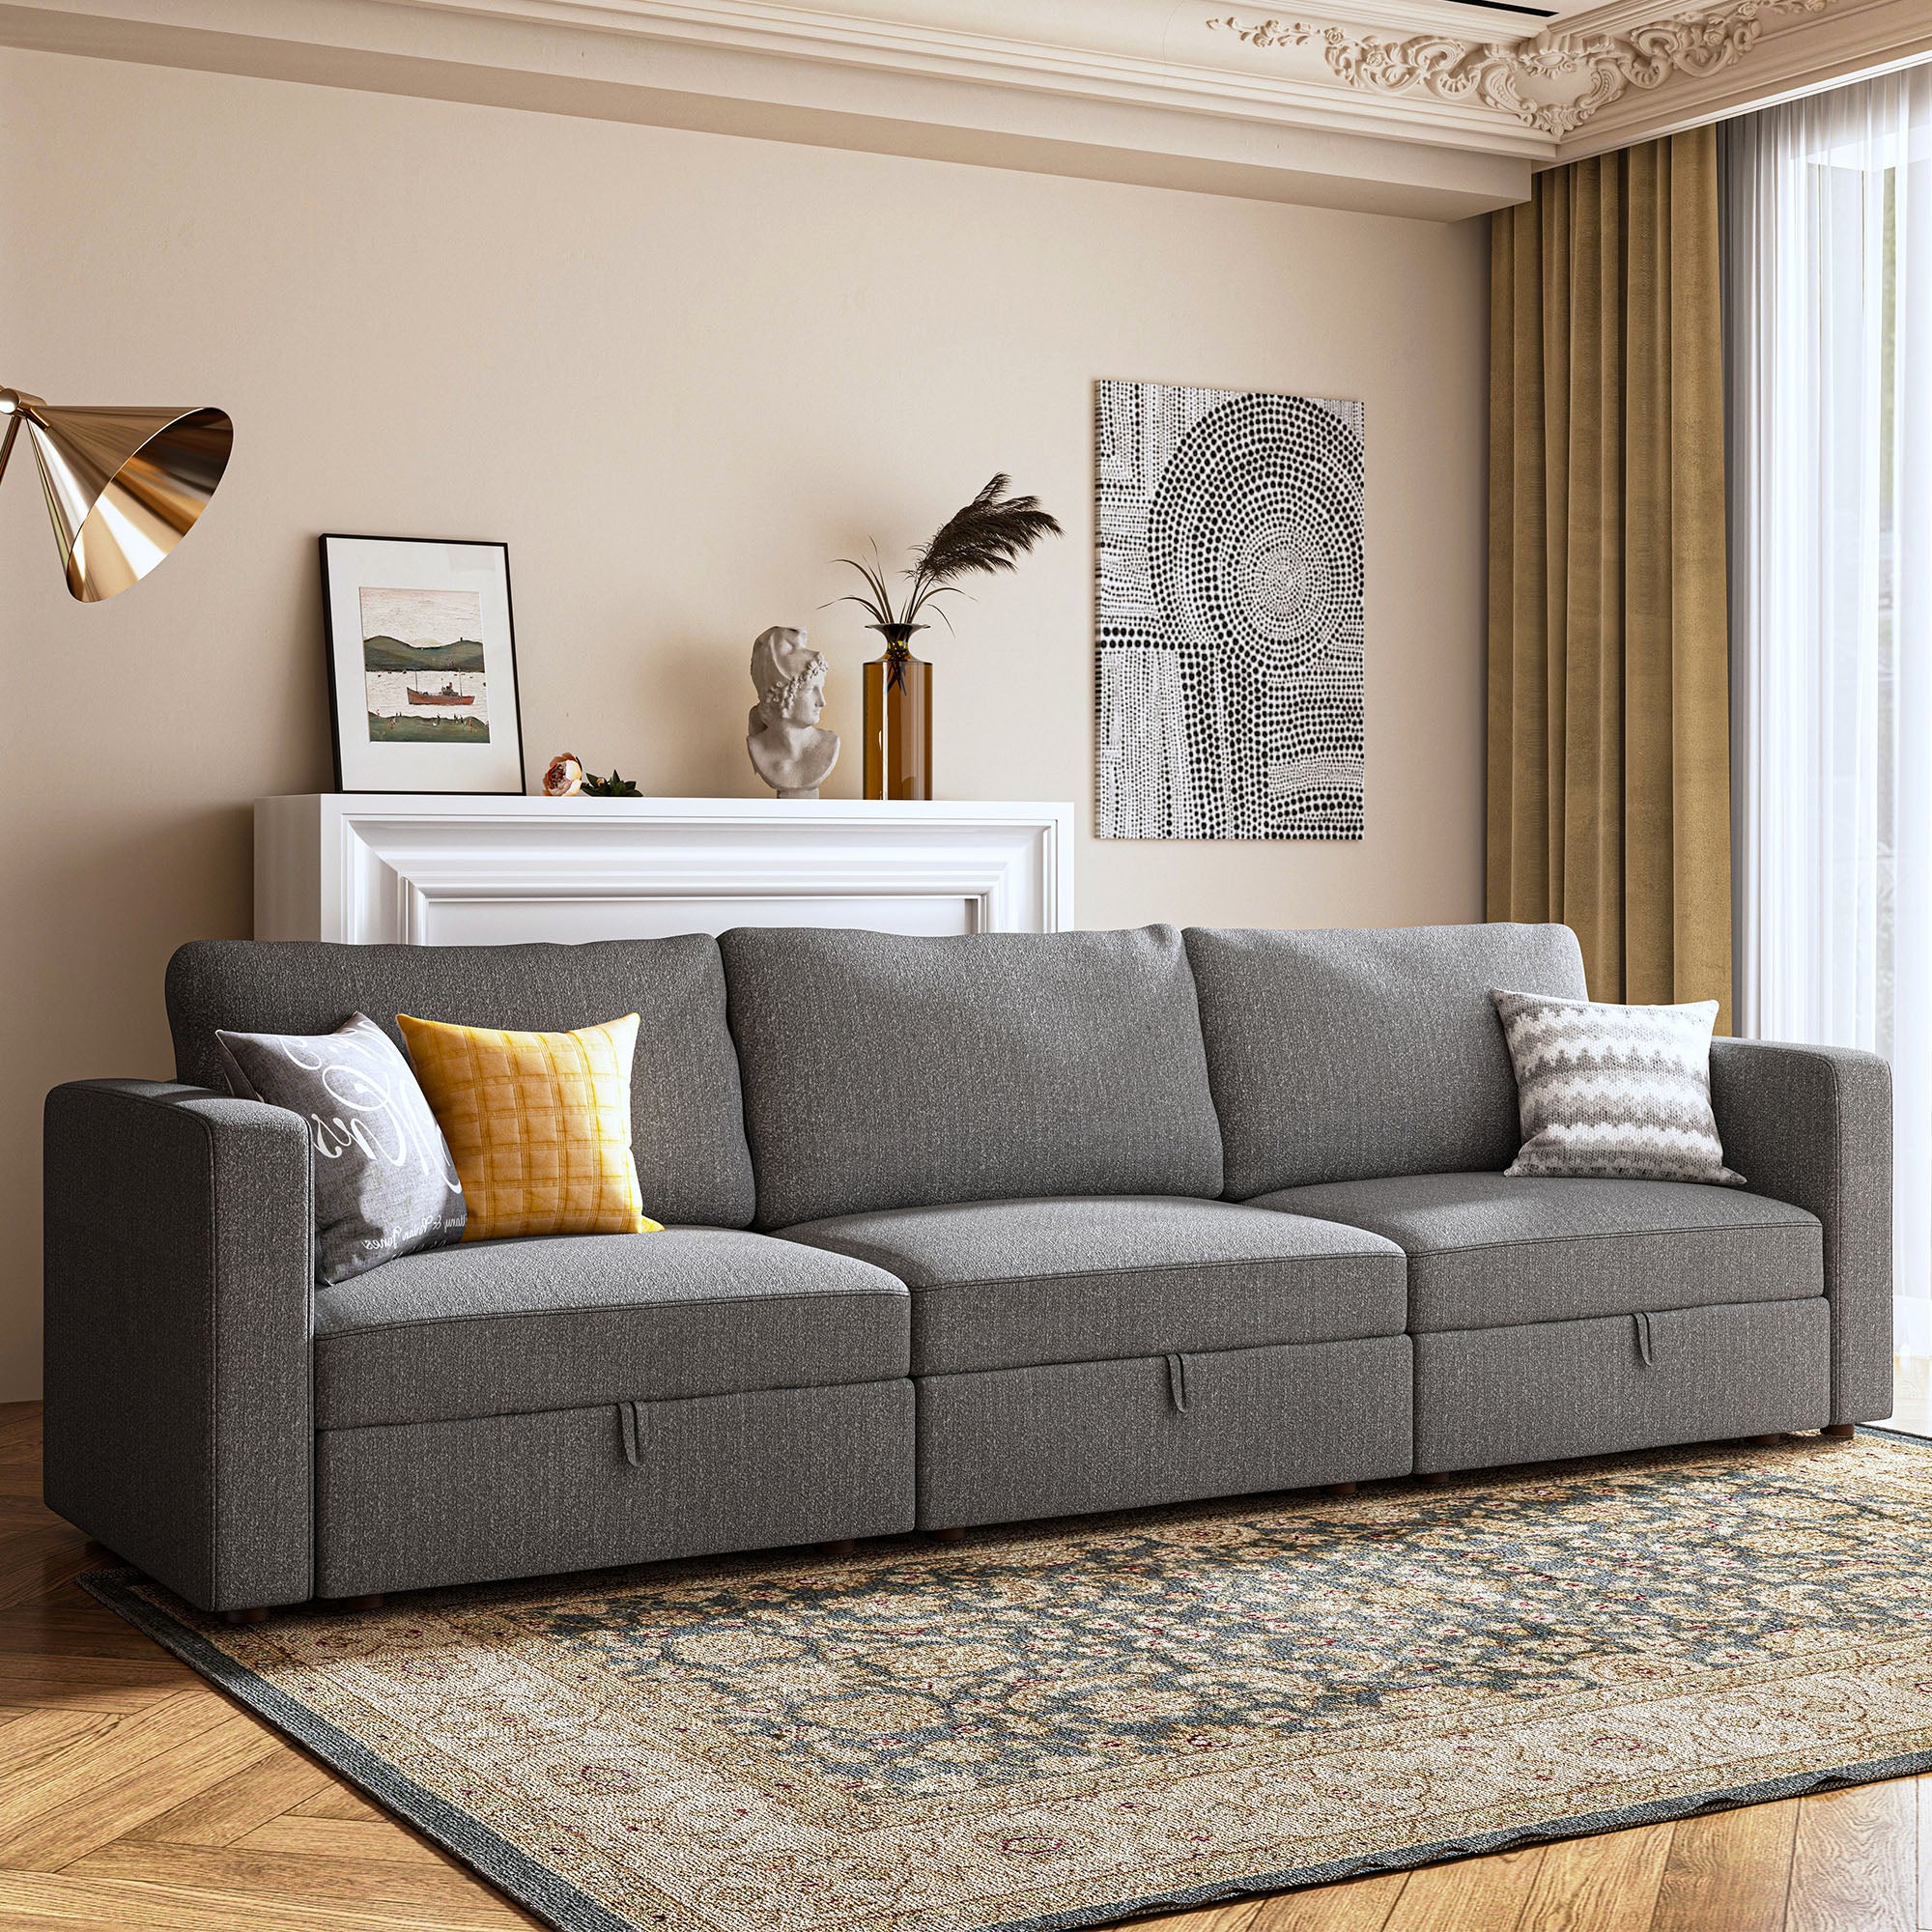 HONBAY Polyester Linen Grey 3 Seaters Modular Sofa Couch with Storage Space